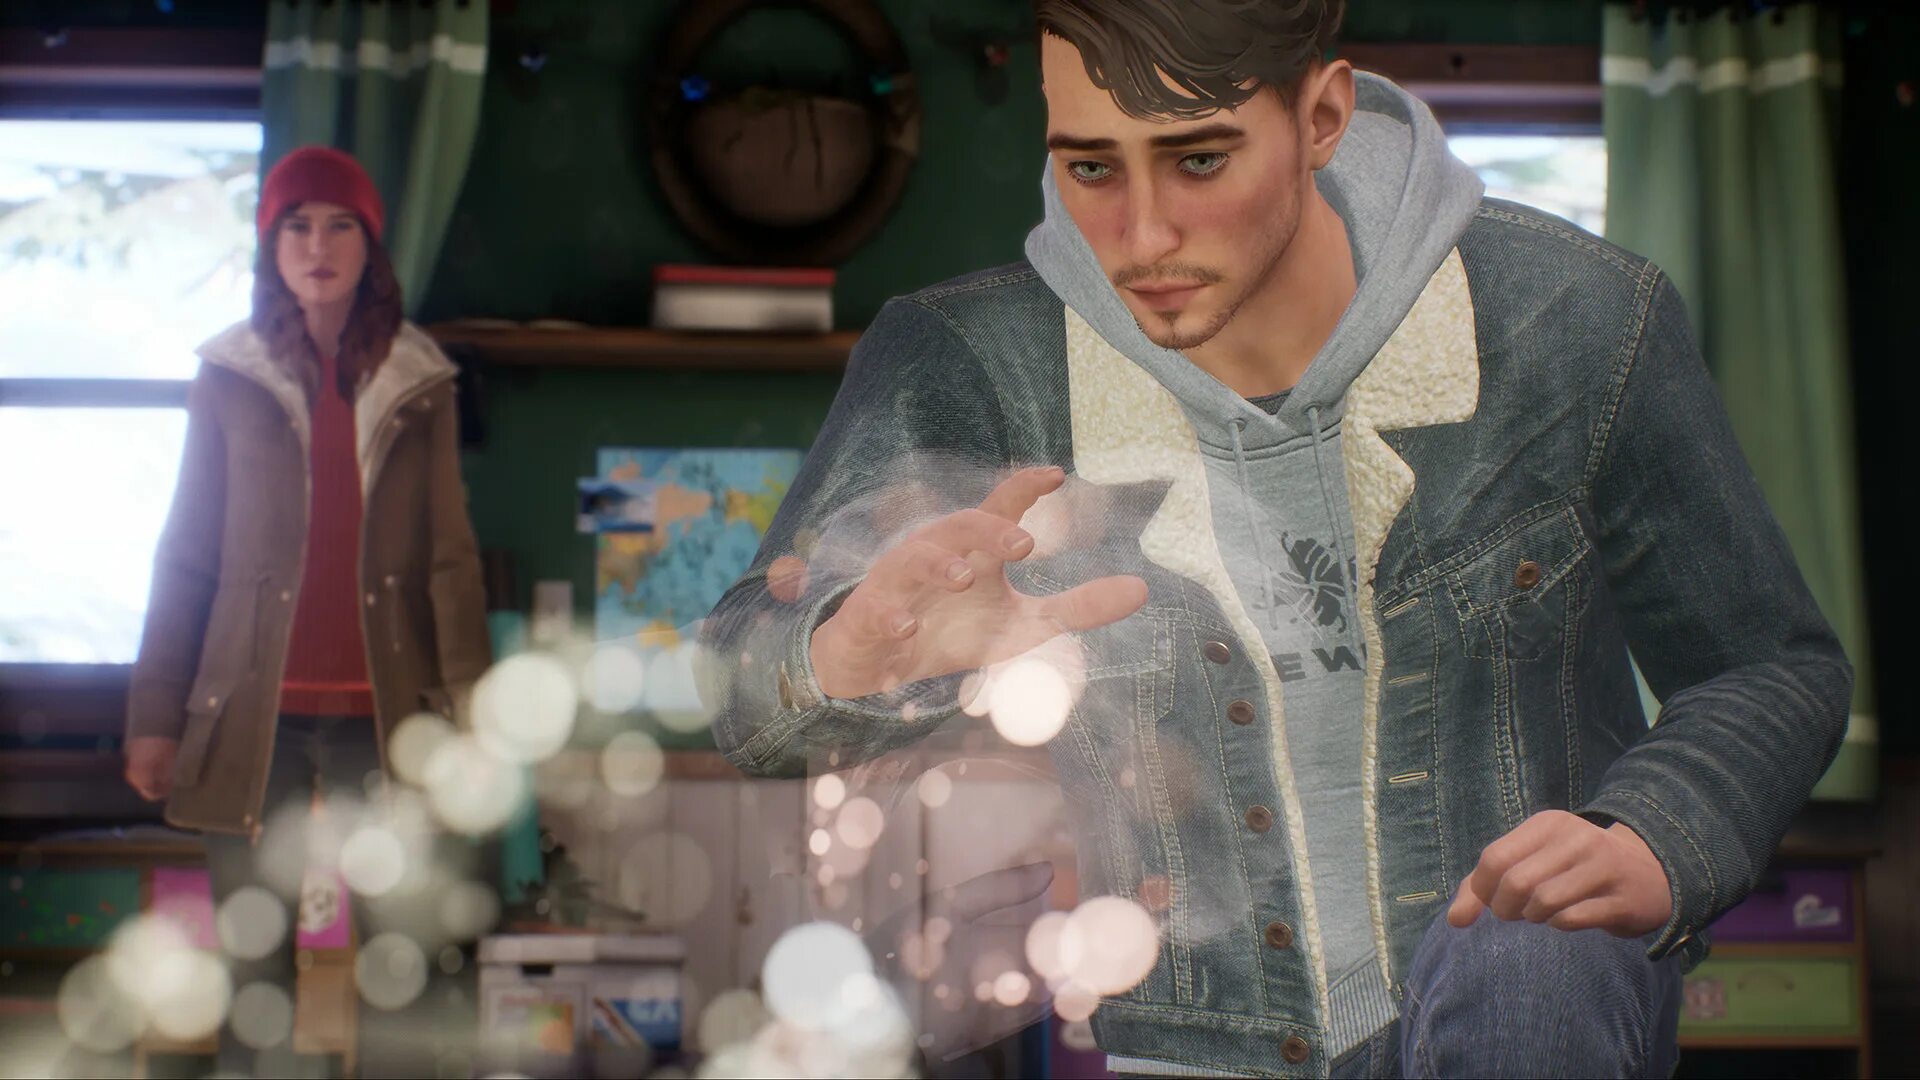 Tell my why игра. Tell me why игра Dontnod. Tell me why (2020).